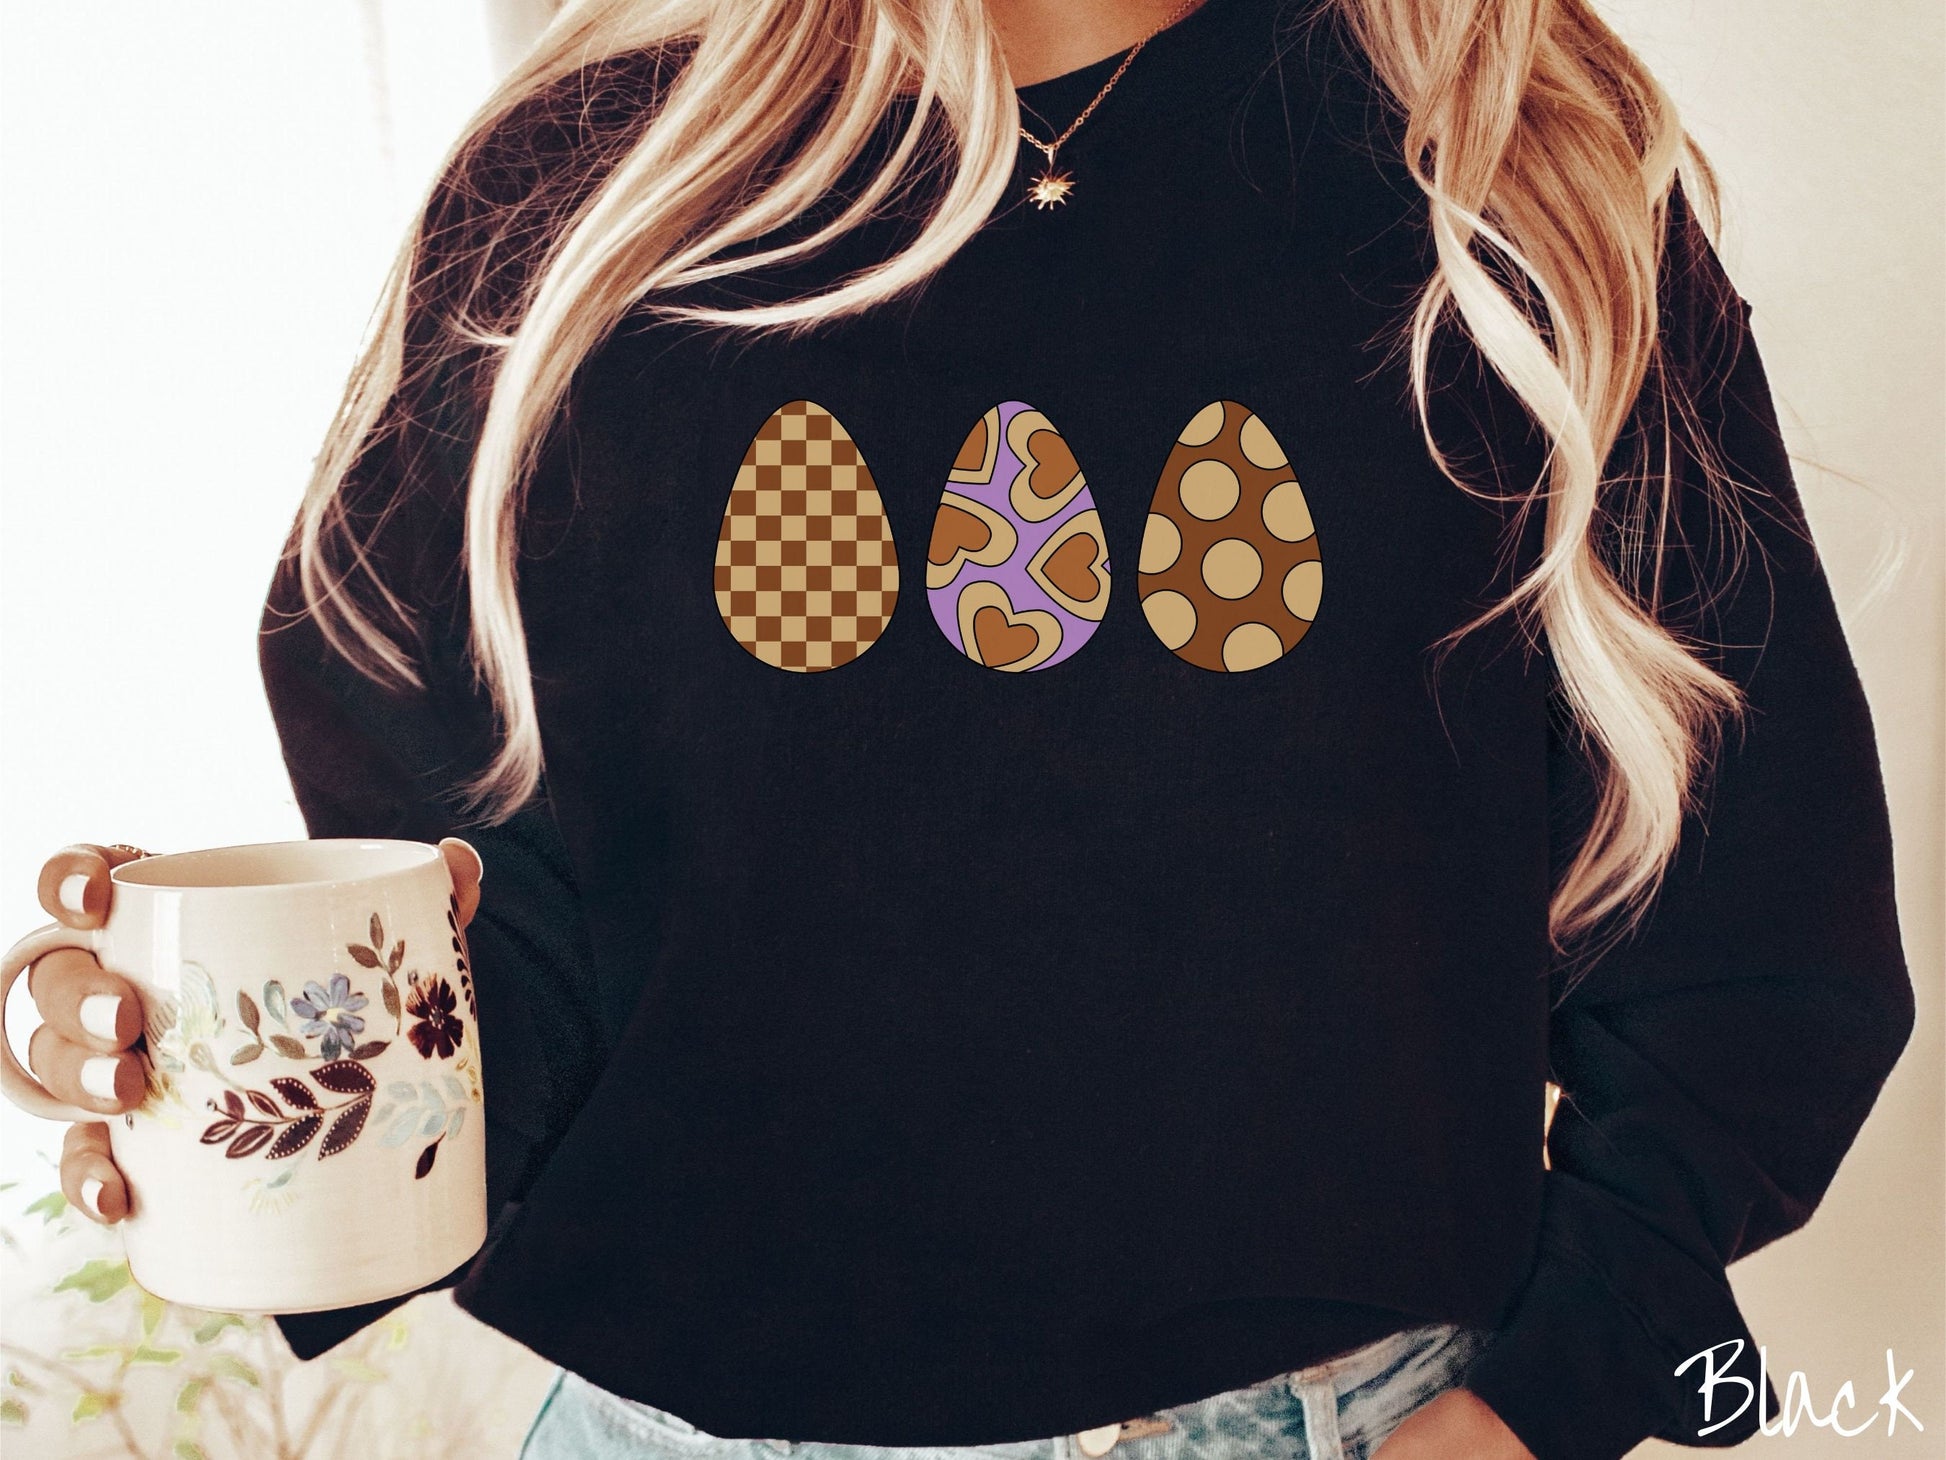 A woman wearing a cute, vintage black colored sweatshirt with three Easter eggs. The left has a light yellow and brown checkerboard pattern, the middle is purple with light yellow brown hearts, and the right is brown with light yellow circles.